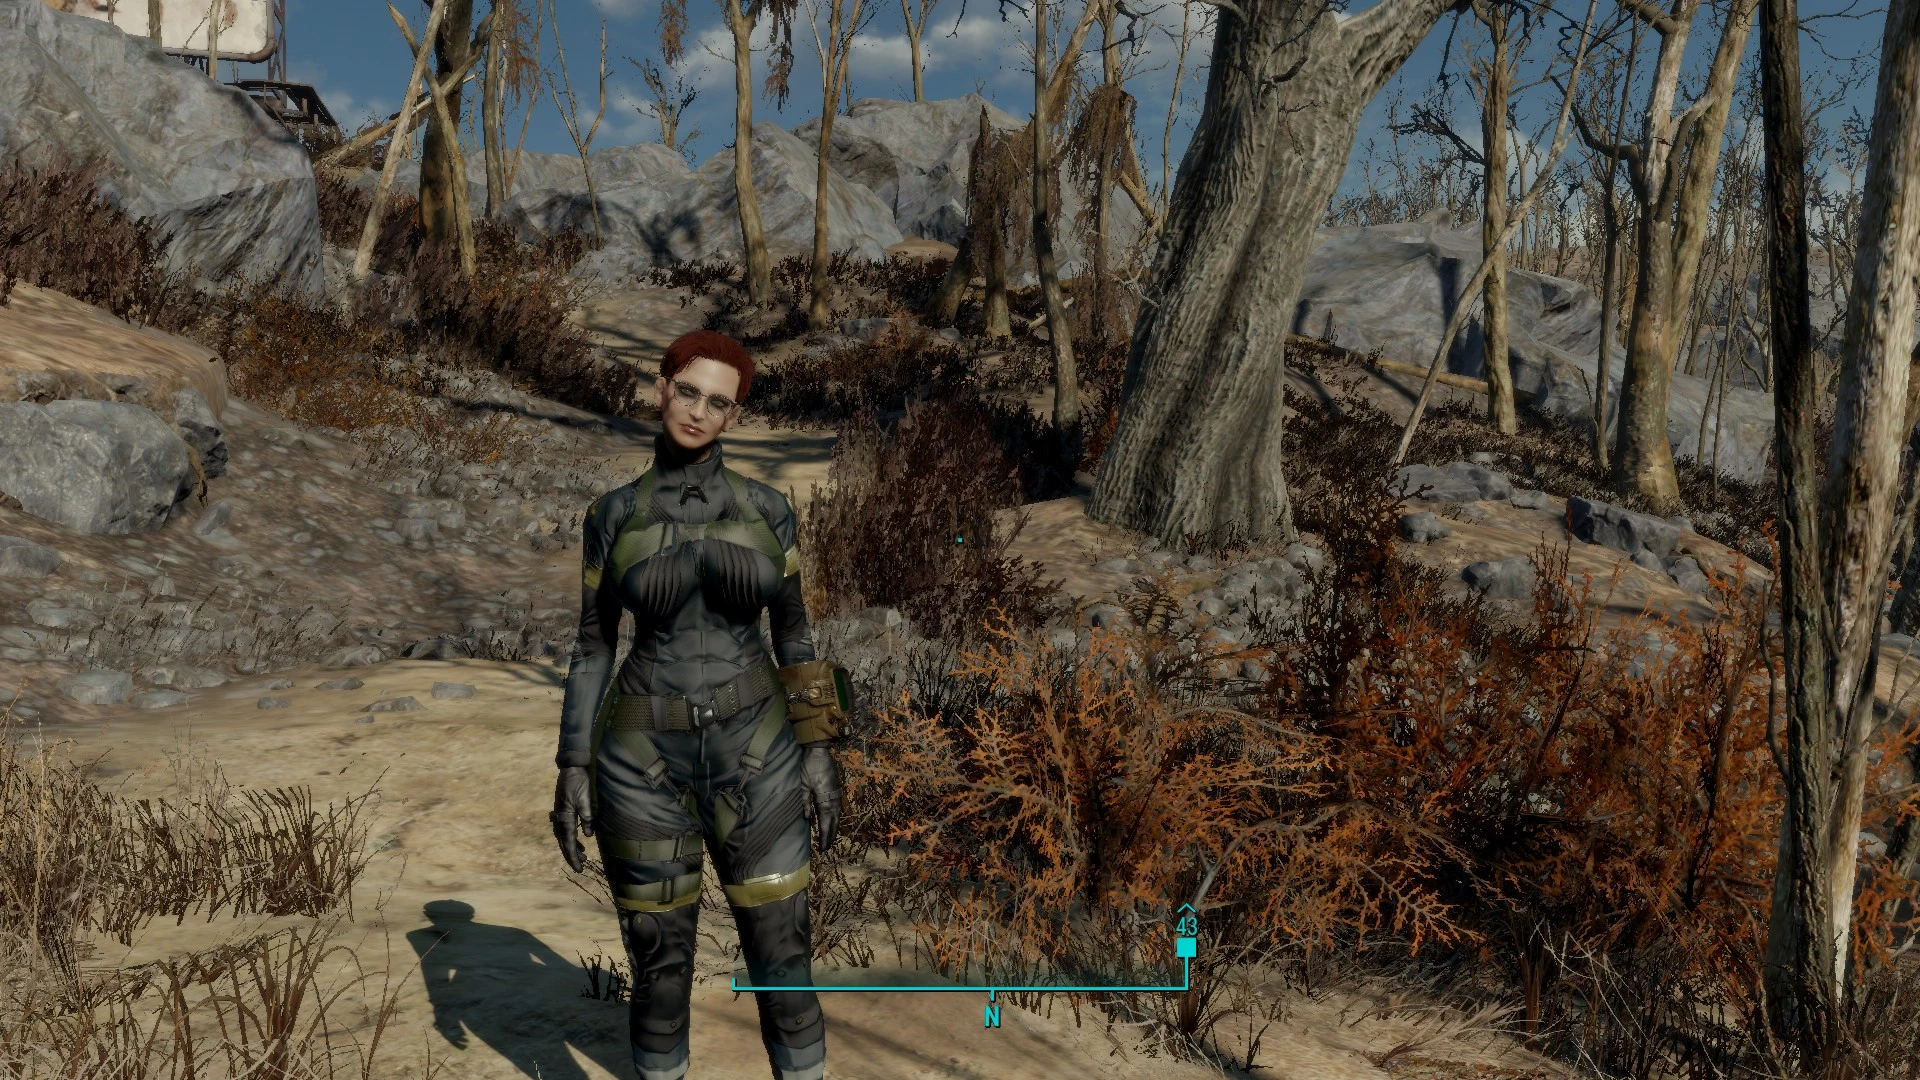 fallout 4 institute outfit mod